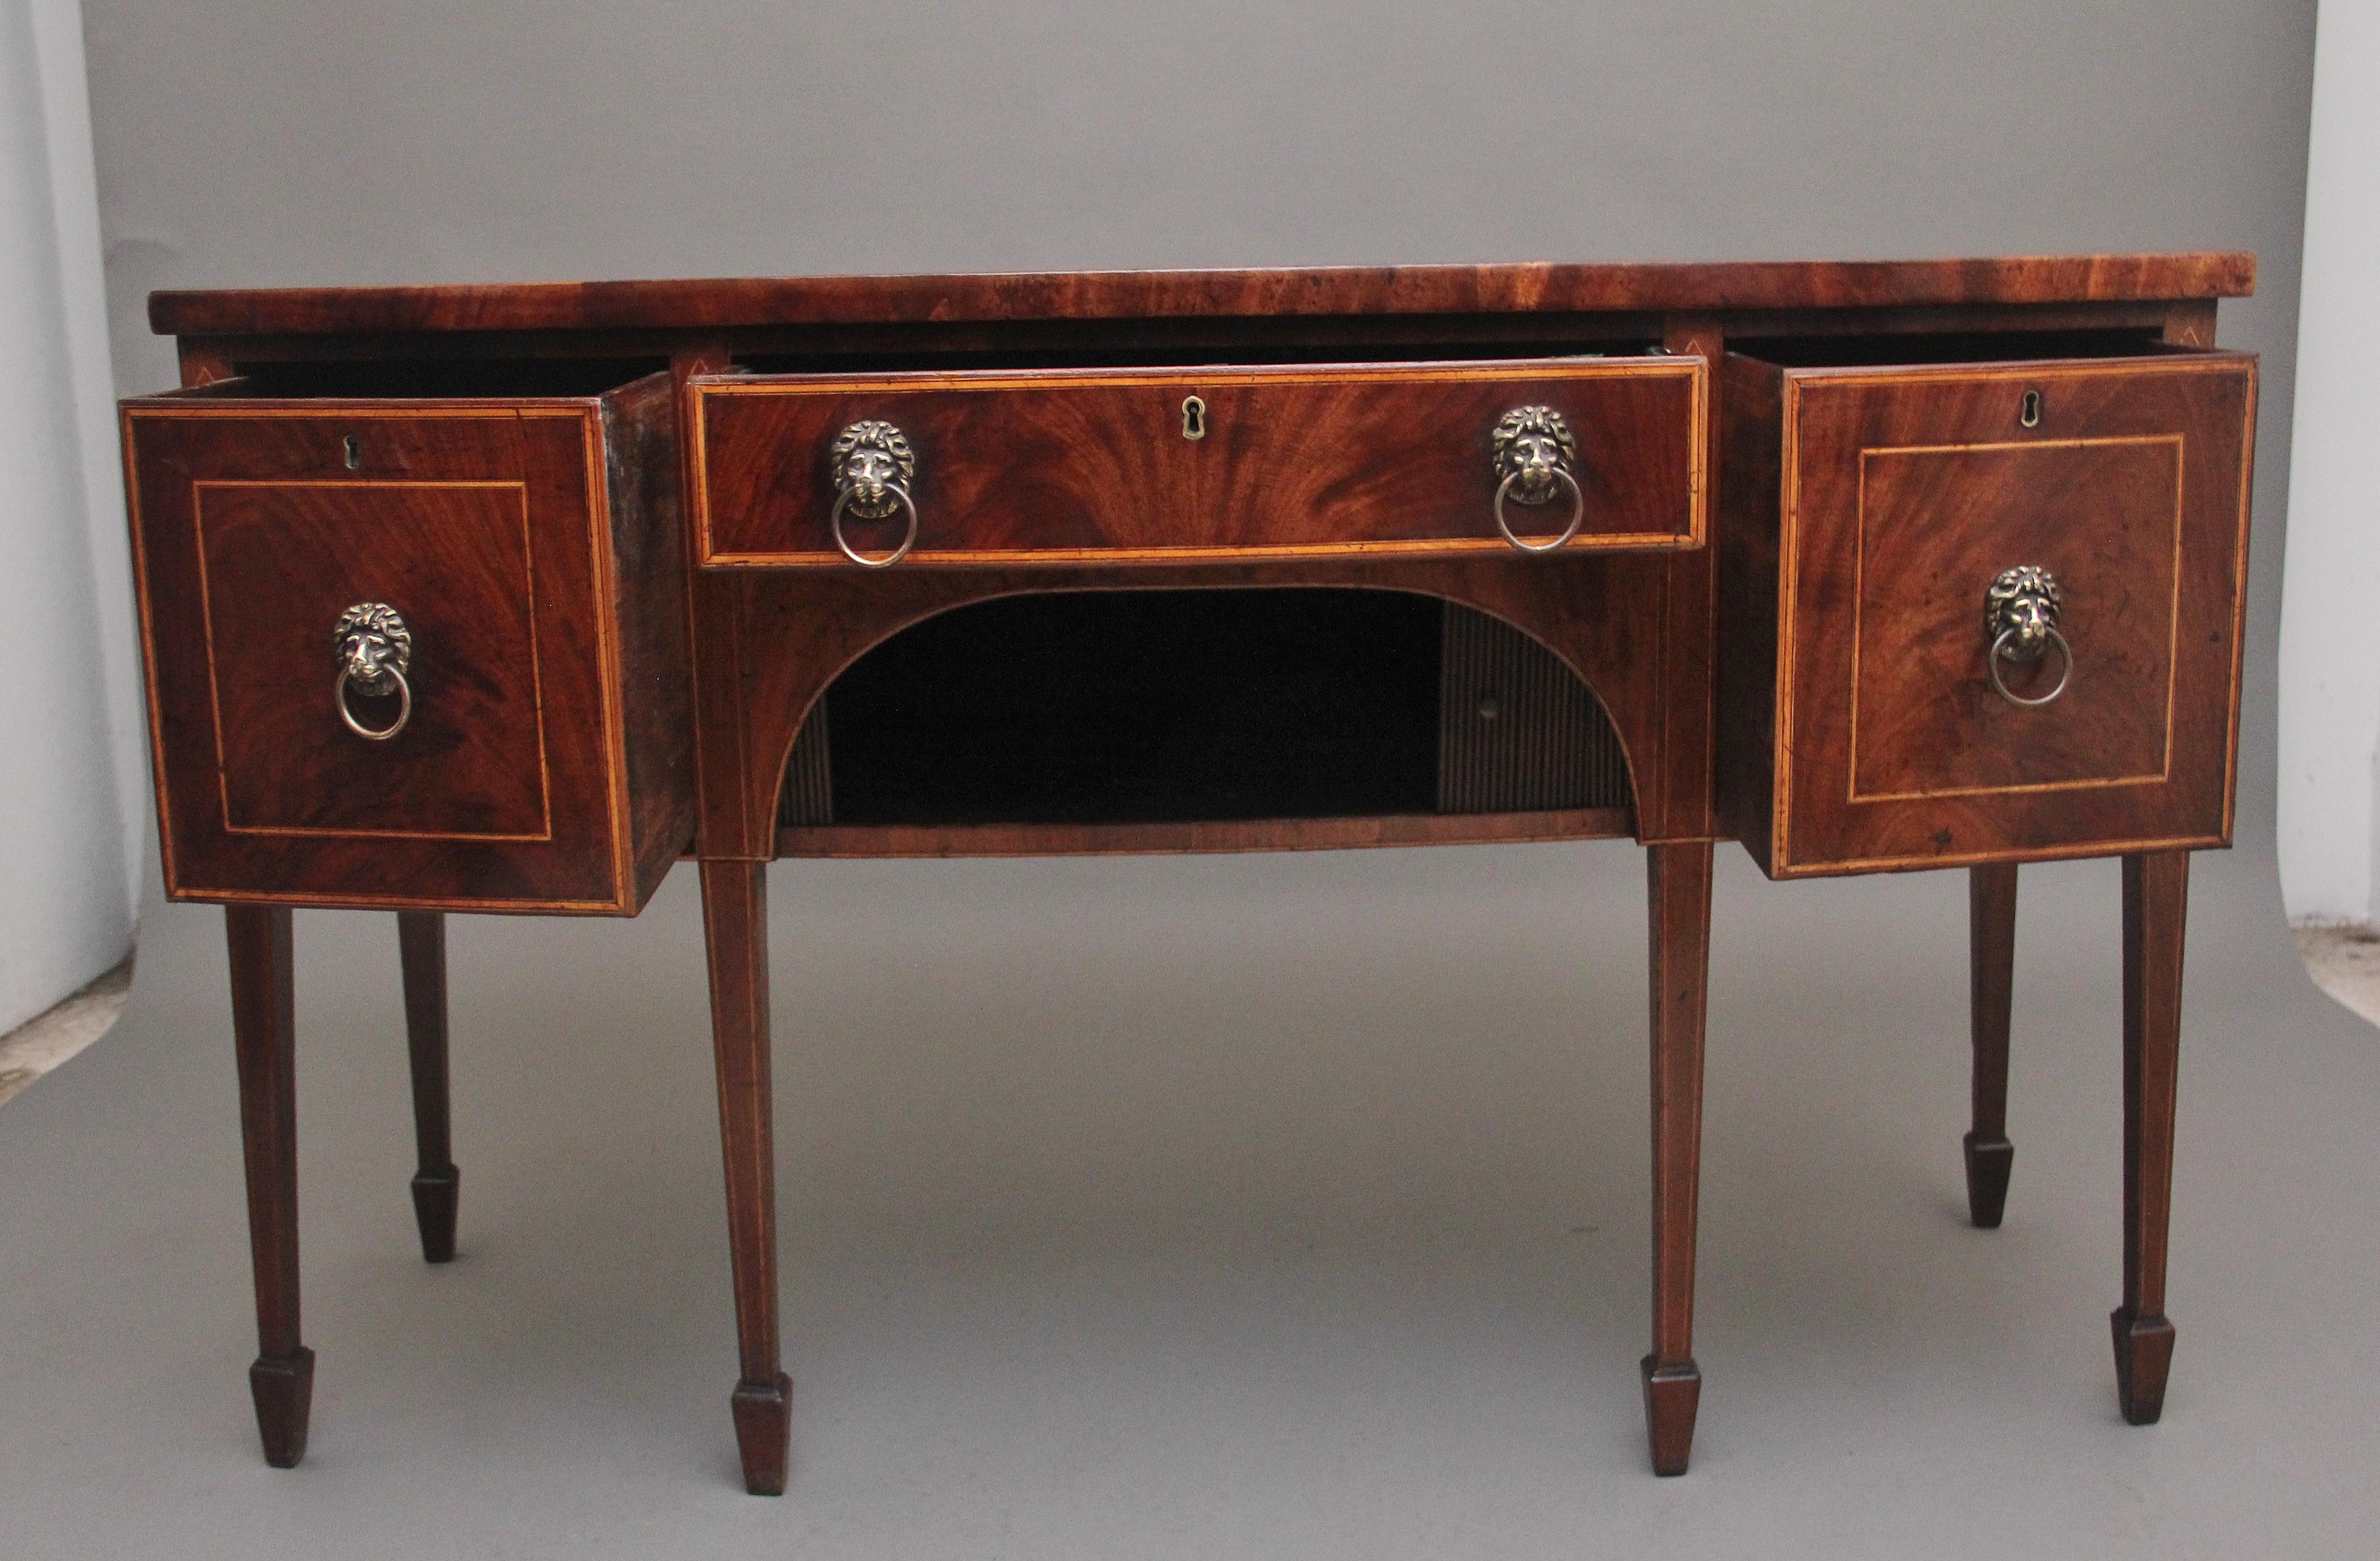 A superb quality early 19th Century mahogany inlaid bowfront sideboard, having a lovely figured top above a central drawer and two deep drawers either side, all drawers are oak lined and have the original lion mask handles, inlaid drawers fronts,